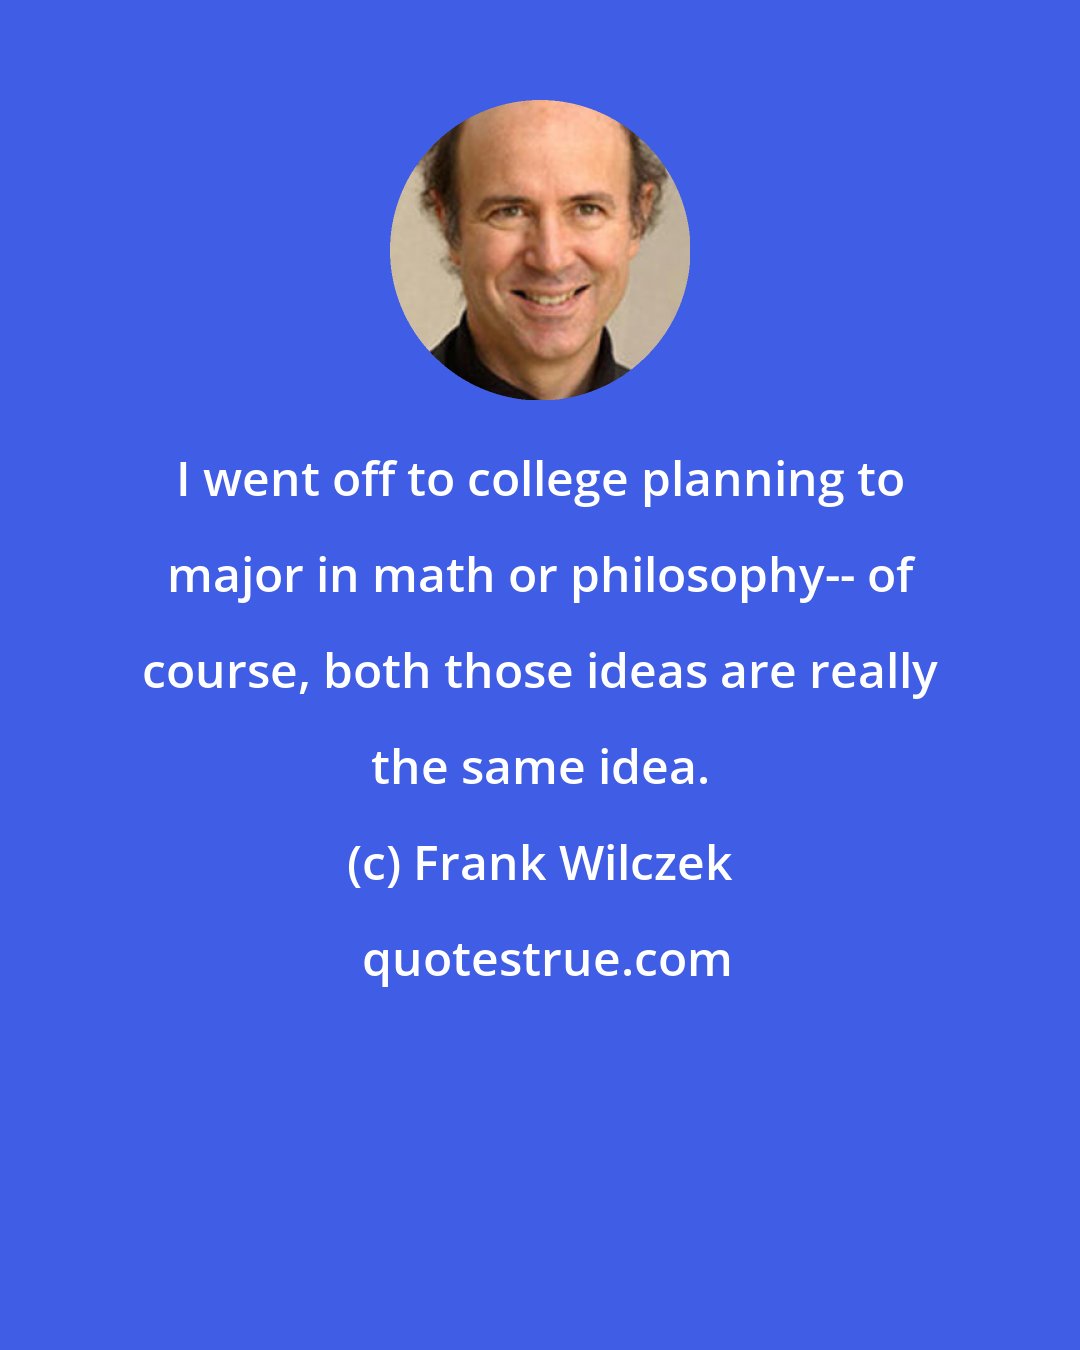 Frank Wilczek: I went off to college planning to major in math or philosophy-- of course, both those ideas are really the same idea.